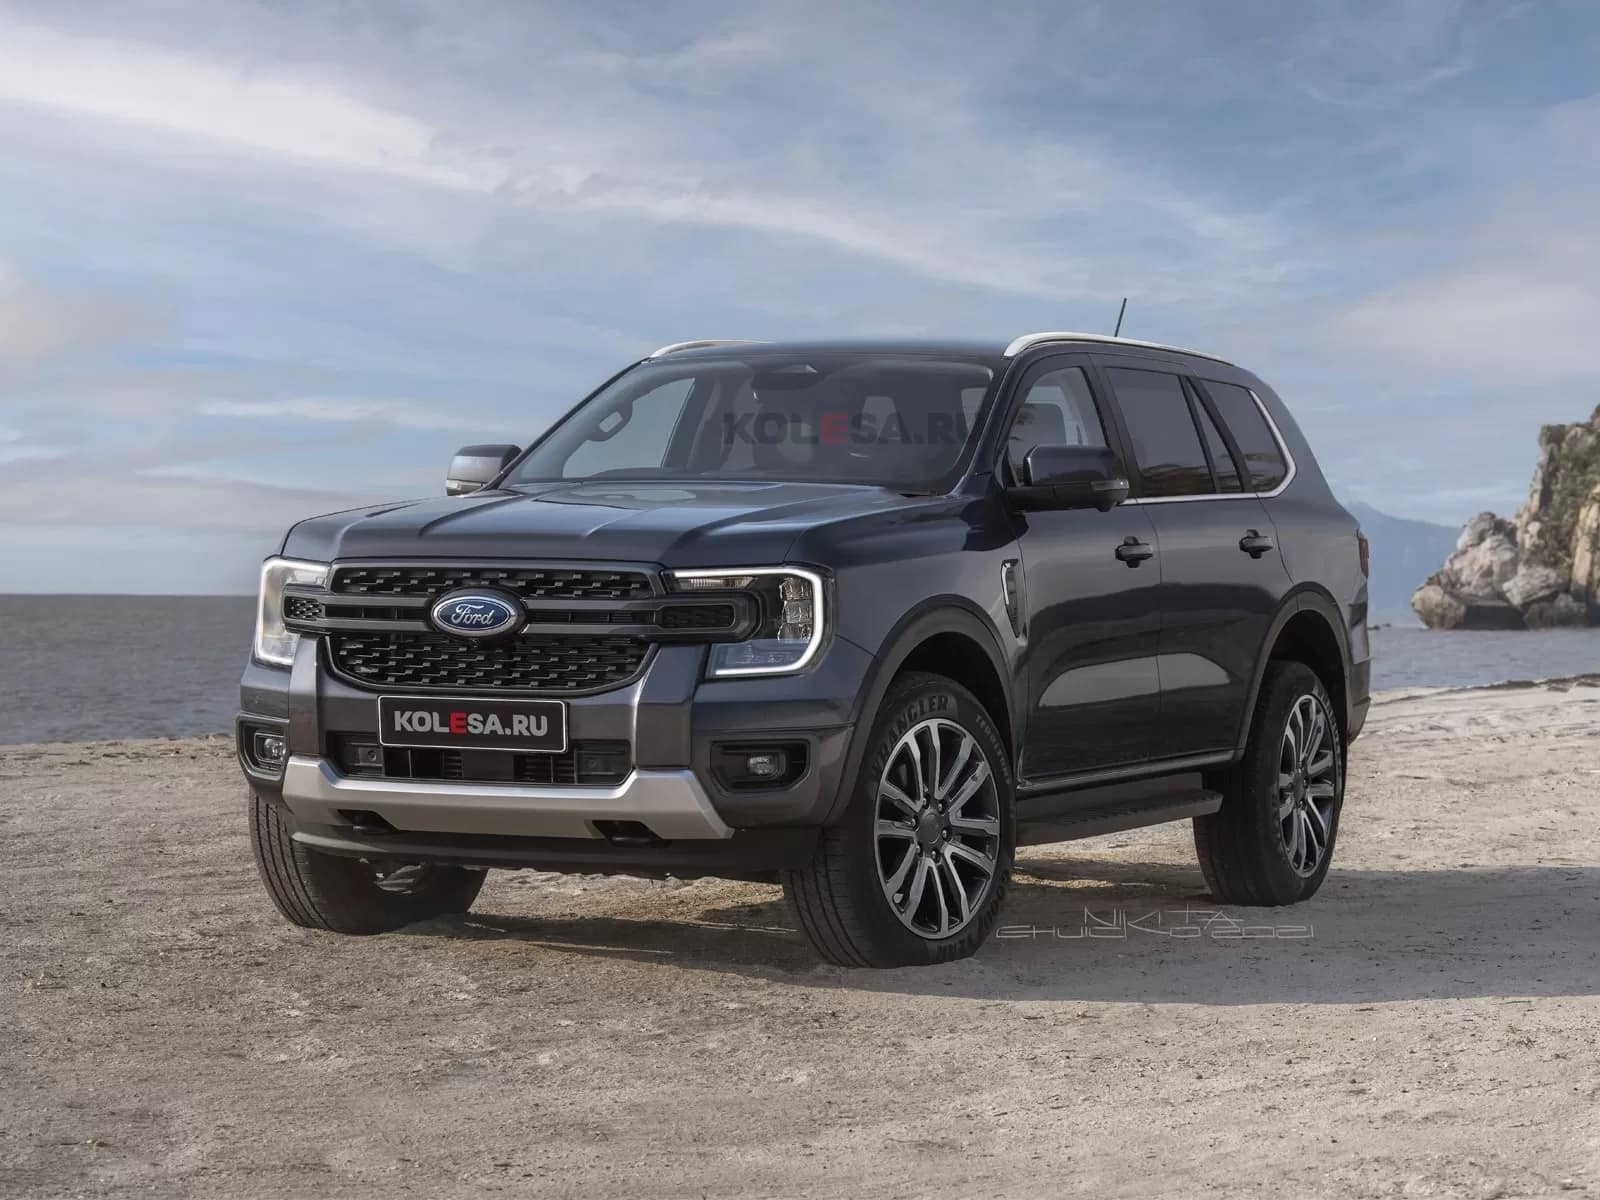 2022 Ford Everest (Endeavour) Rendered Digitally In Manufacturing Avatar